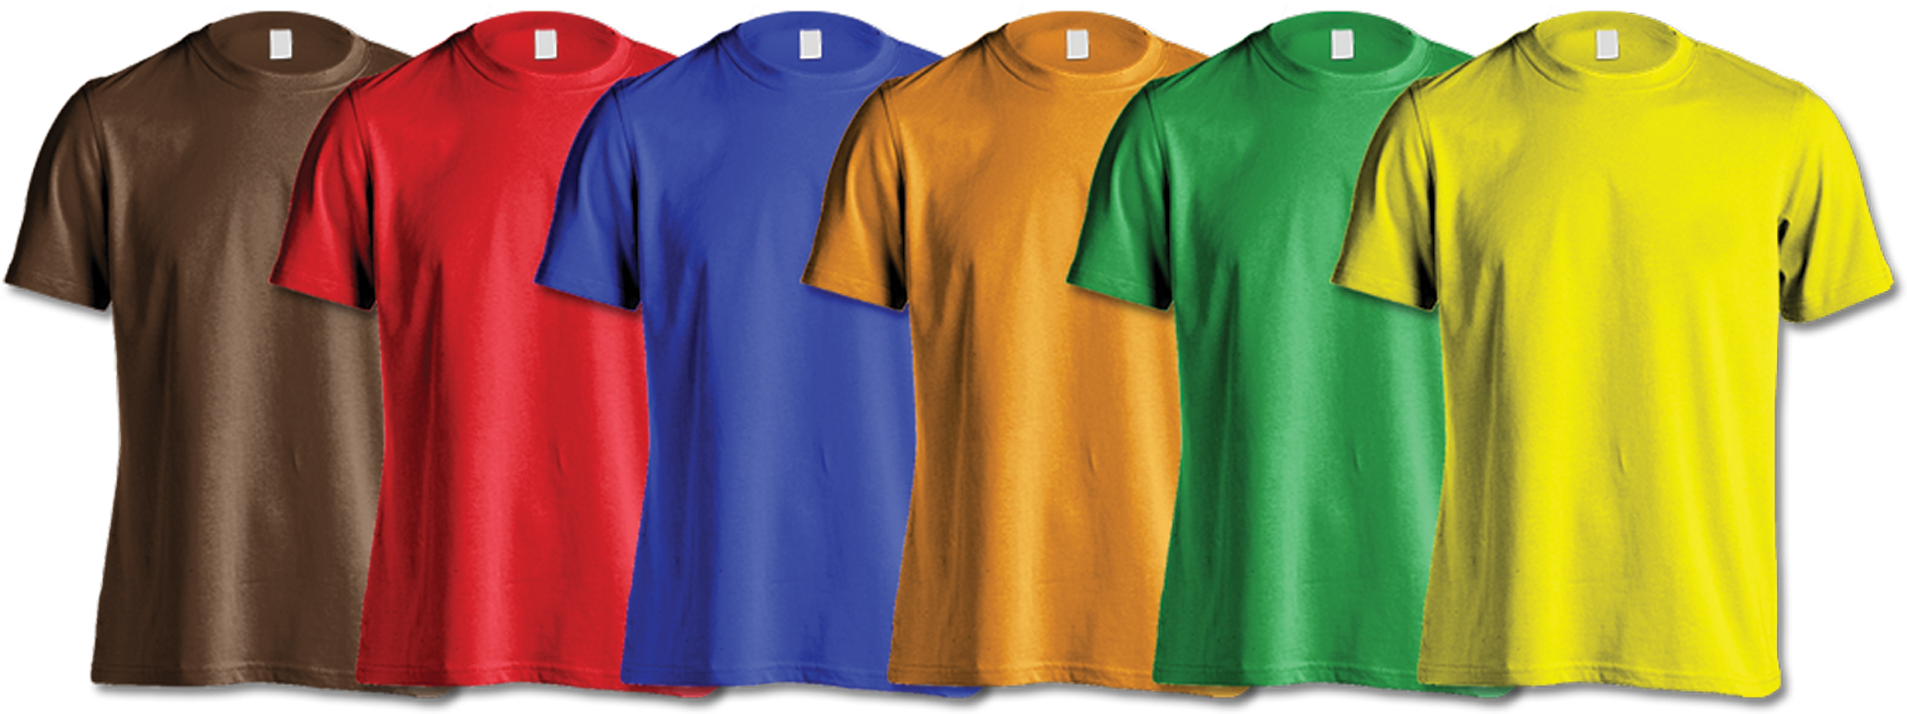 Free Shirts Png, Download Free Shirts Png png images, Free ClipArts on ...